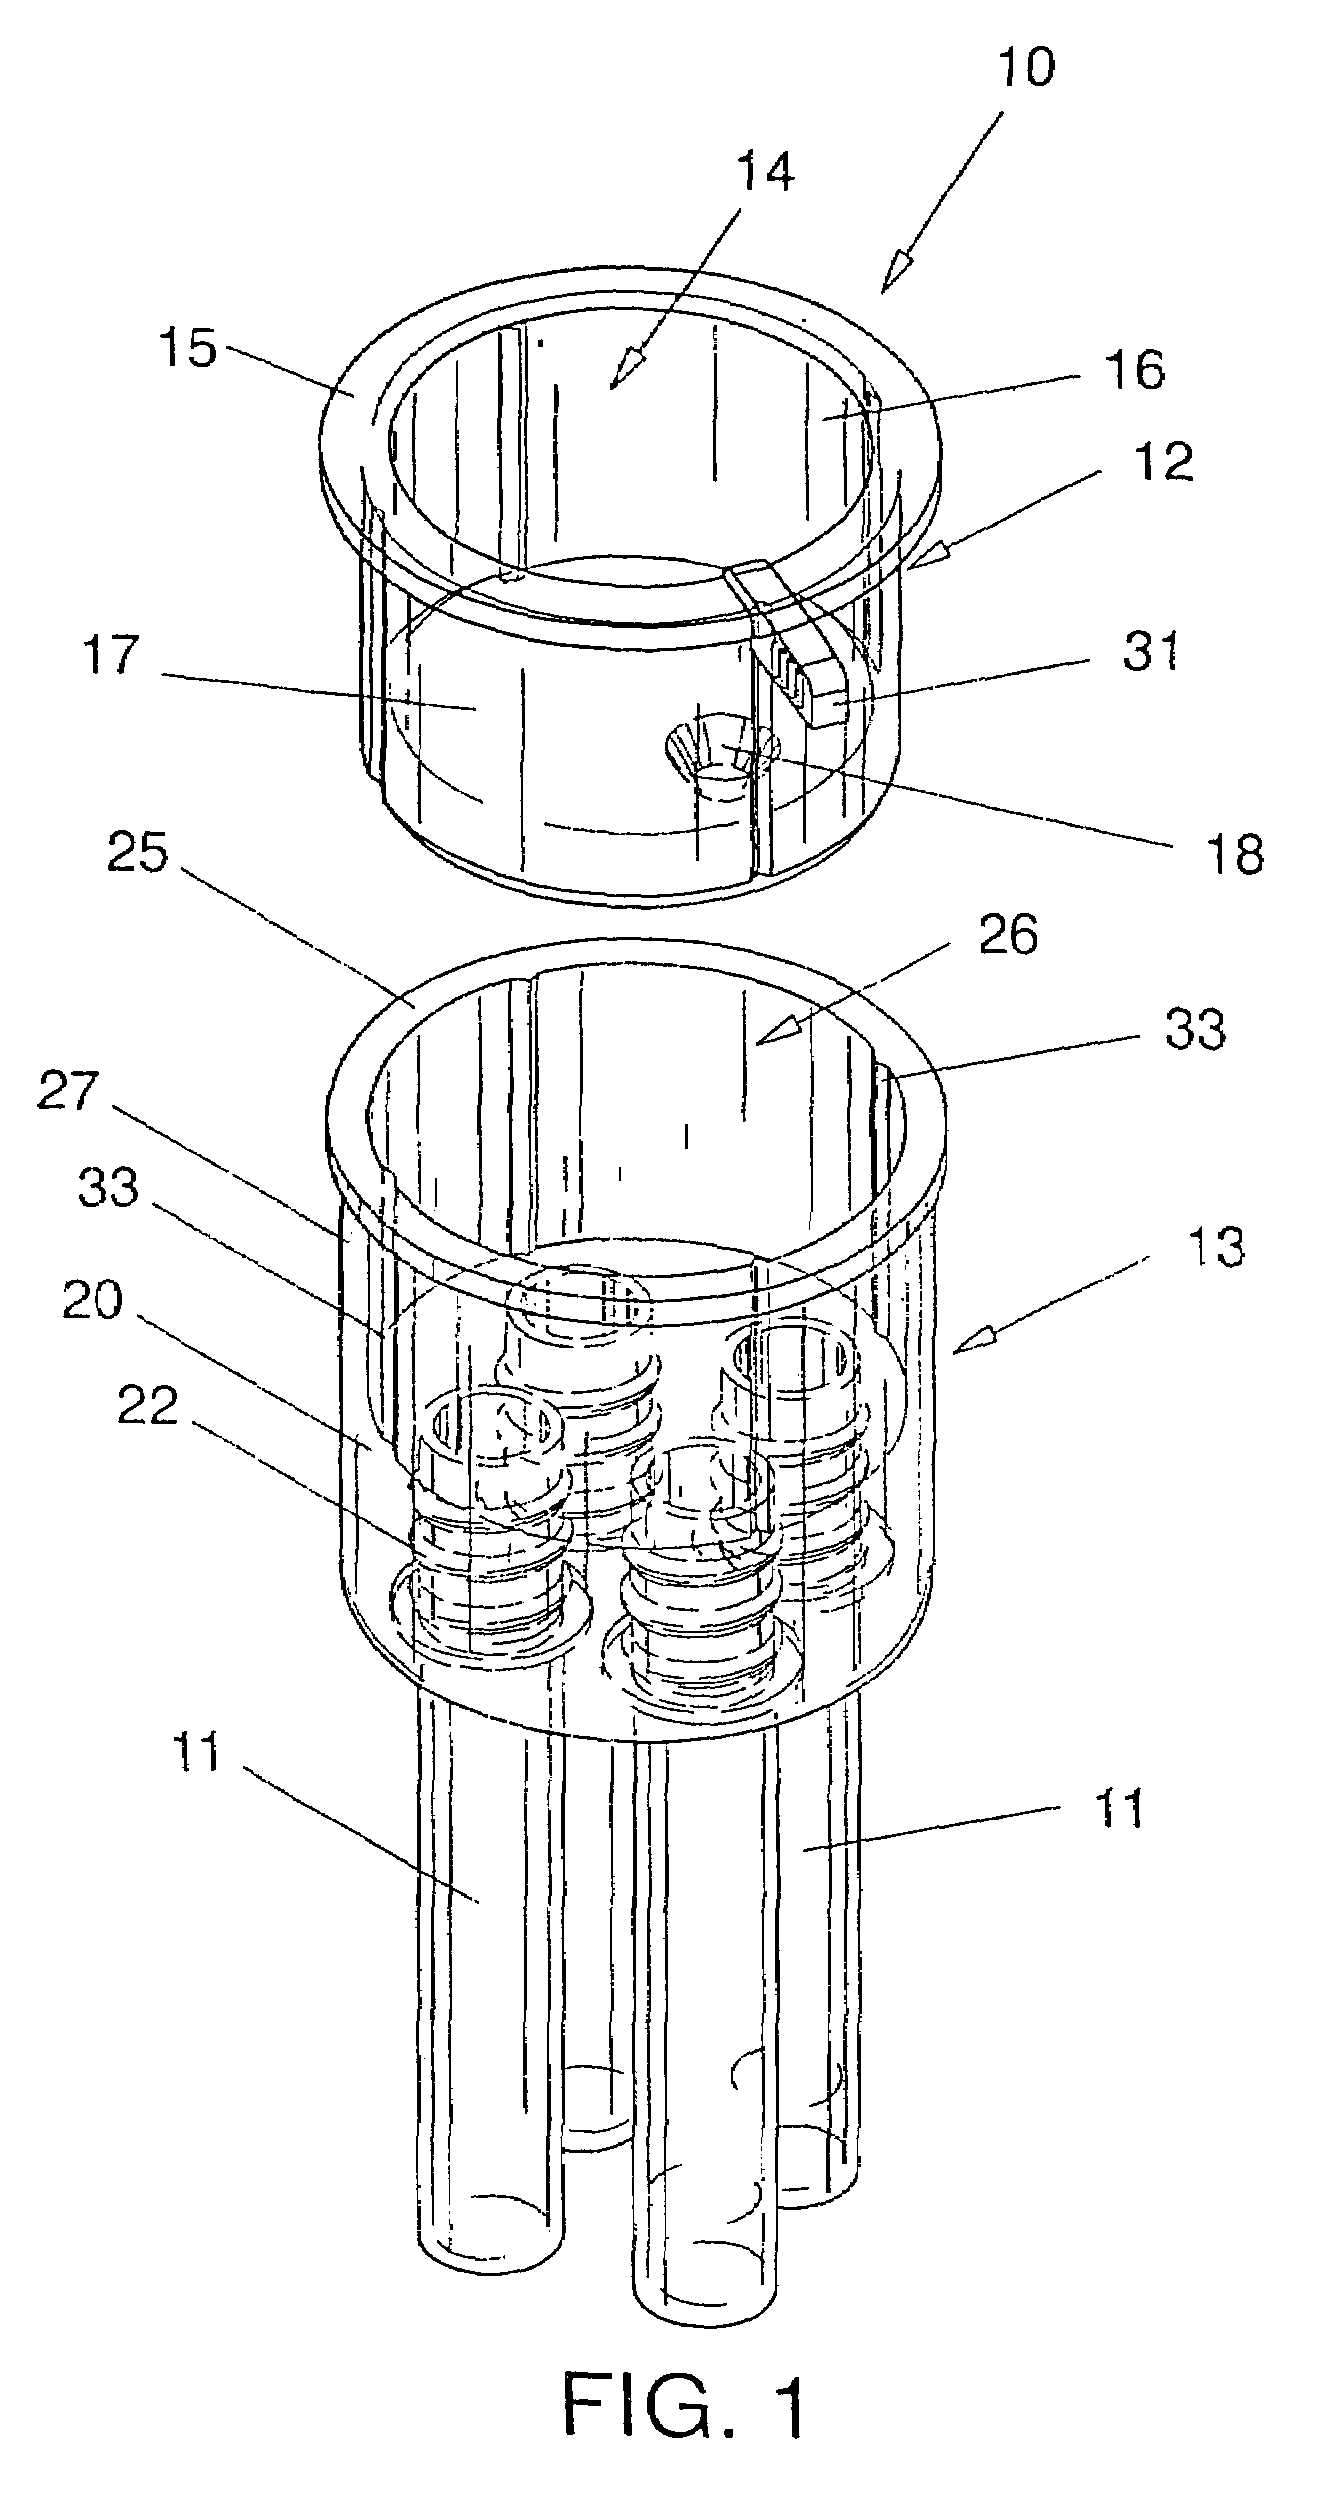 Lumbar puncture fluid collection device